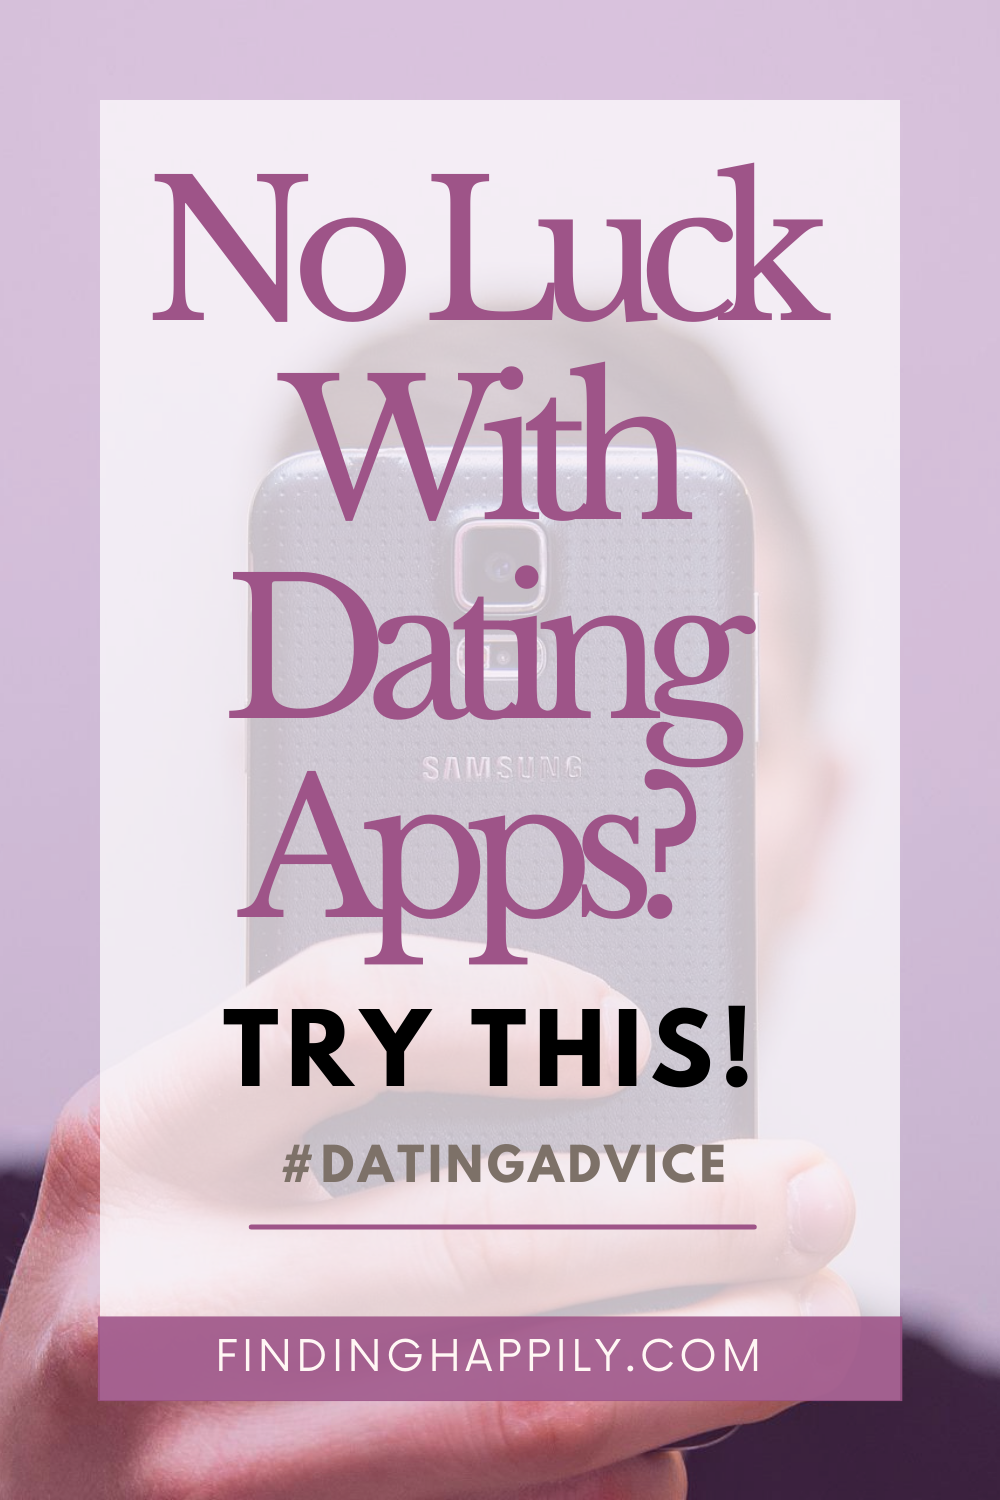 No Luck With Dating Apps?